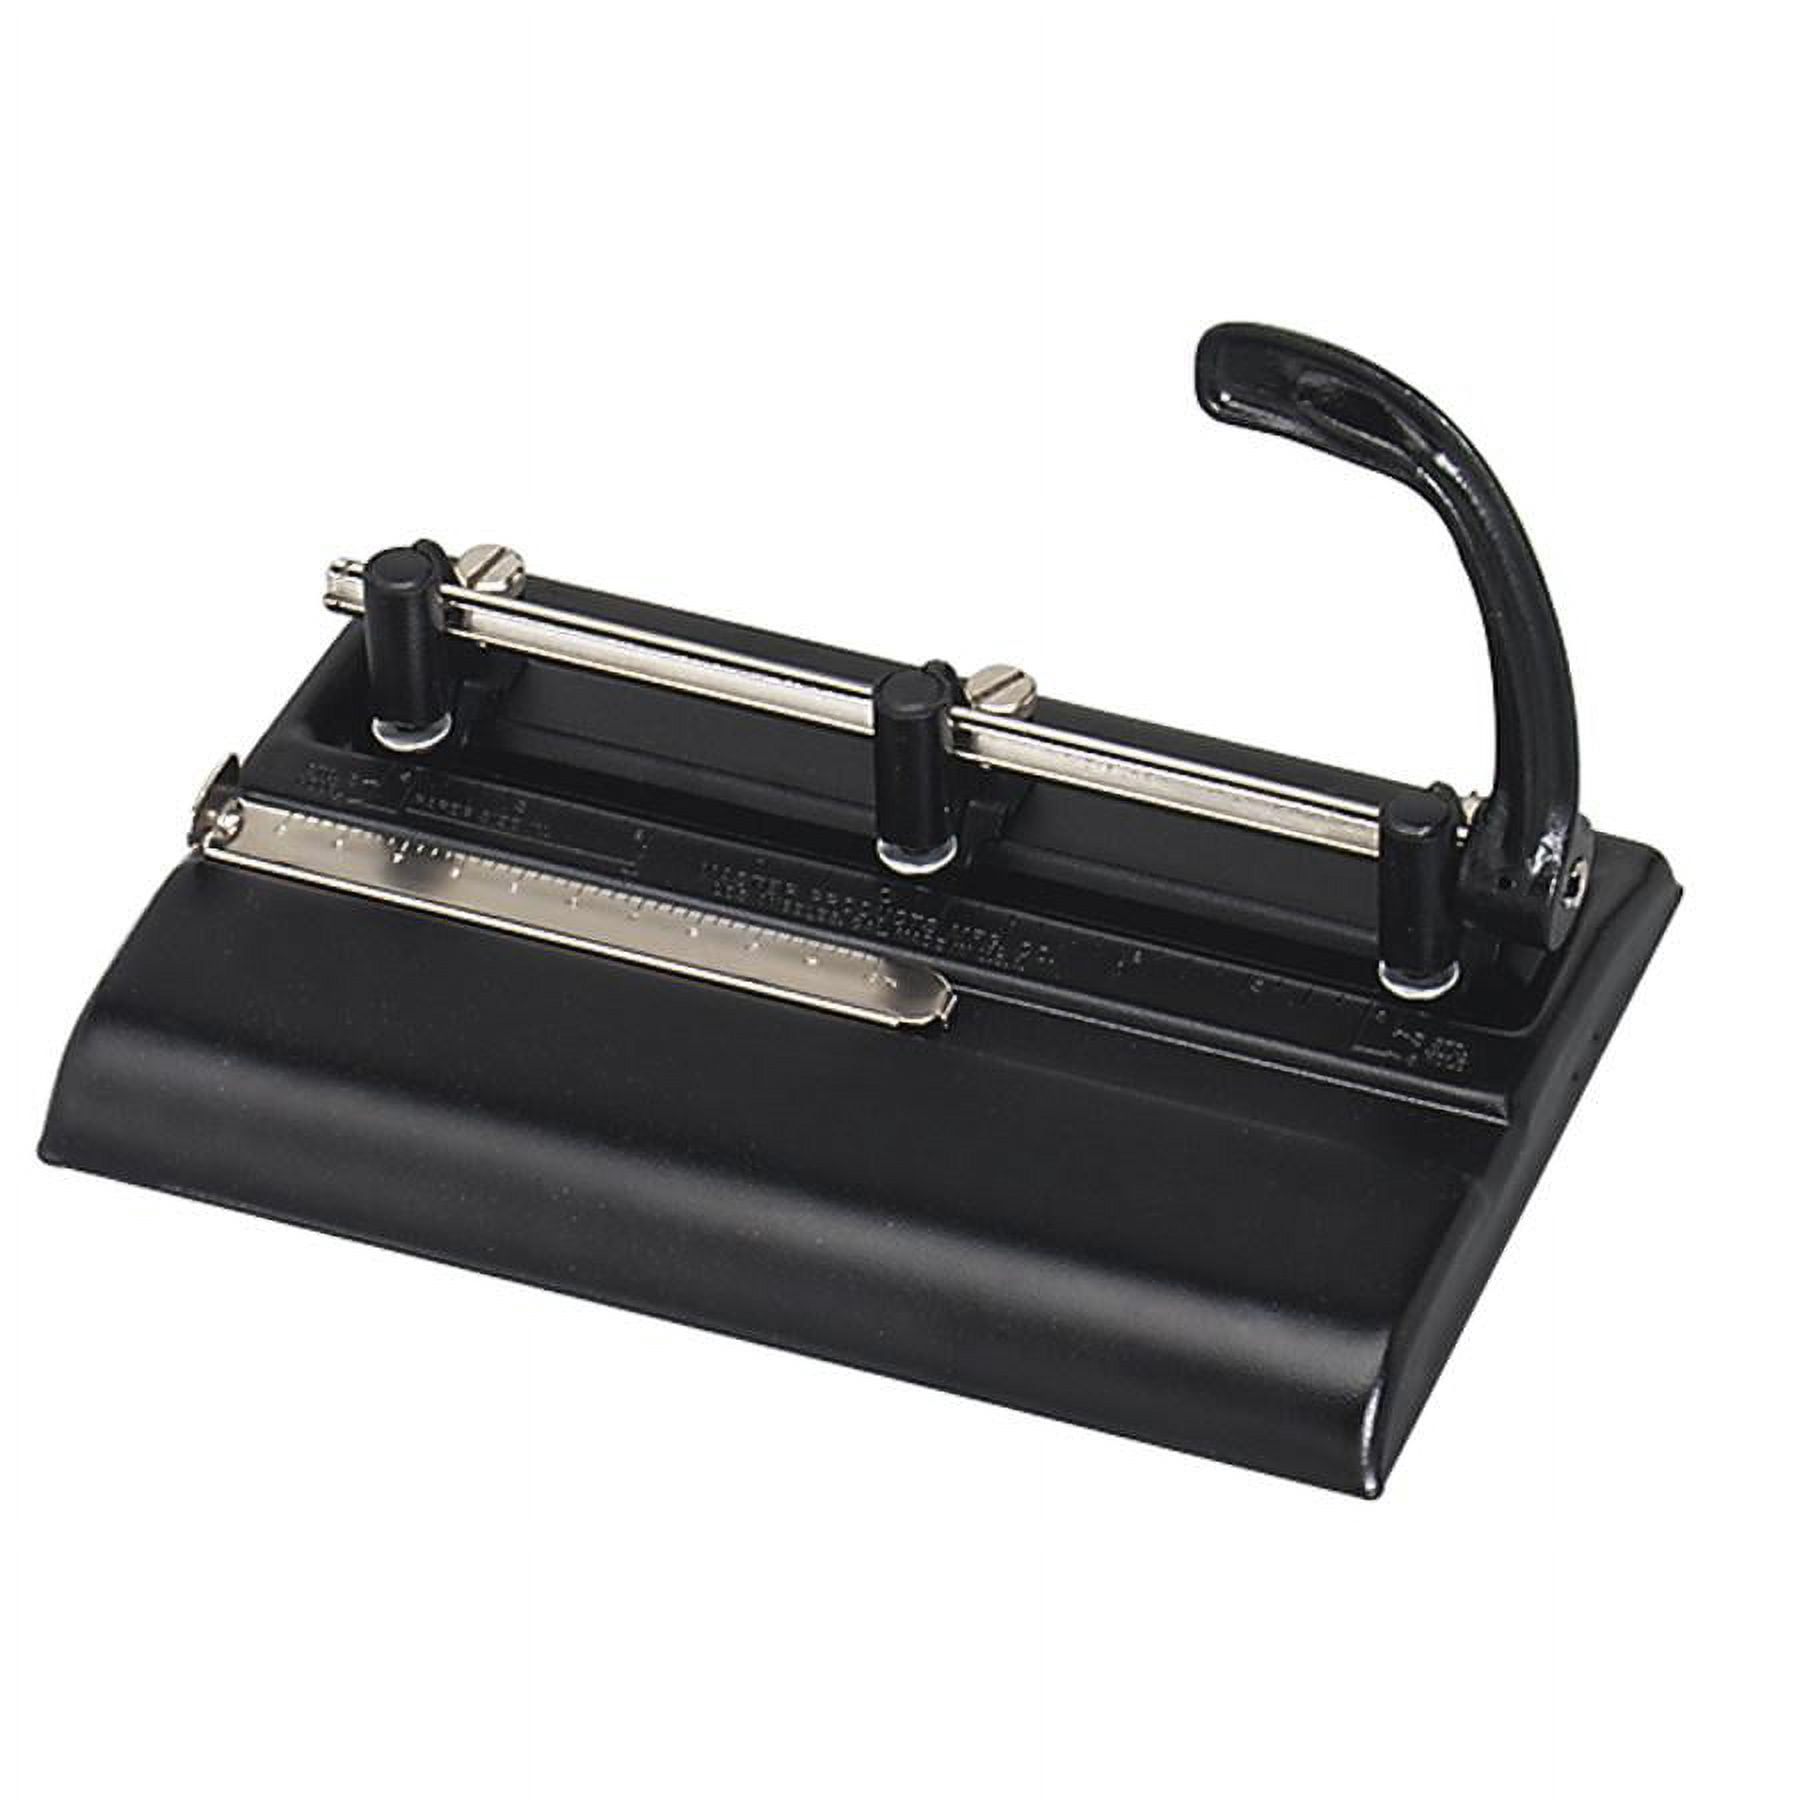 PaperPro 3-Hole Punch - LegalSupply